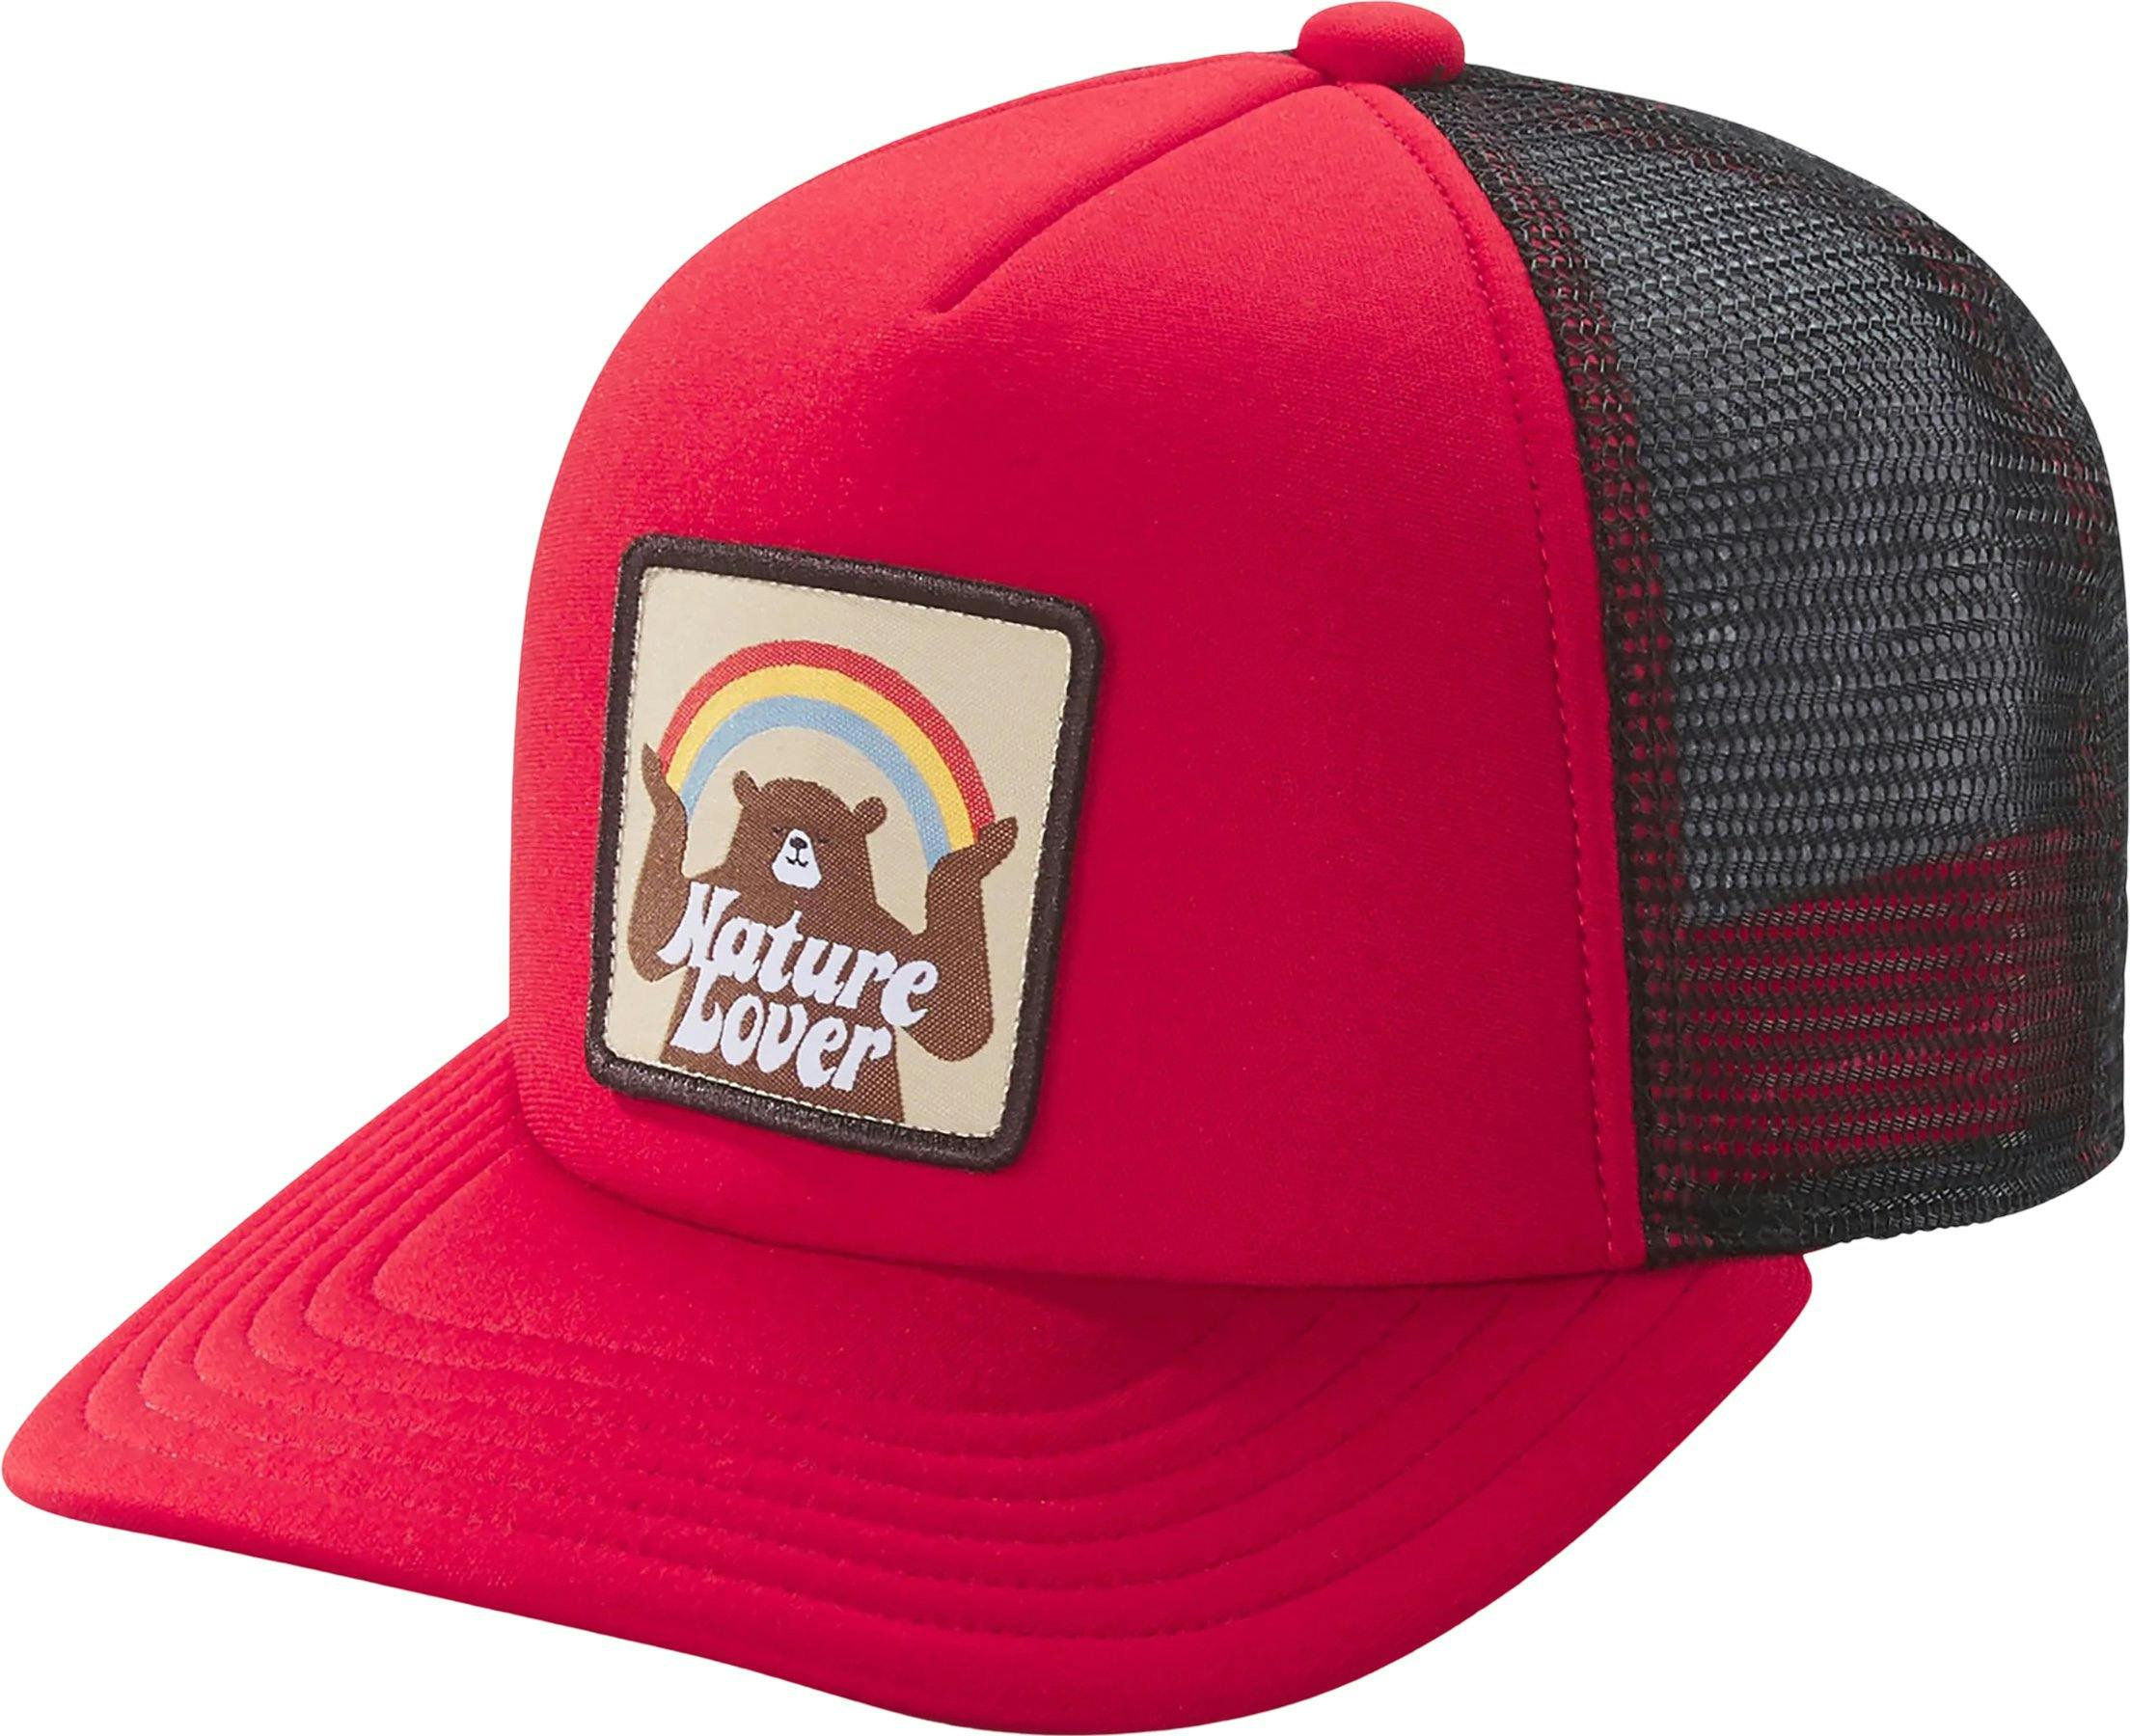 Product image for Grom Trucker Hat - Kids